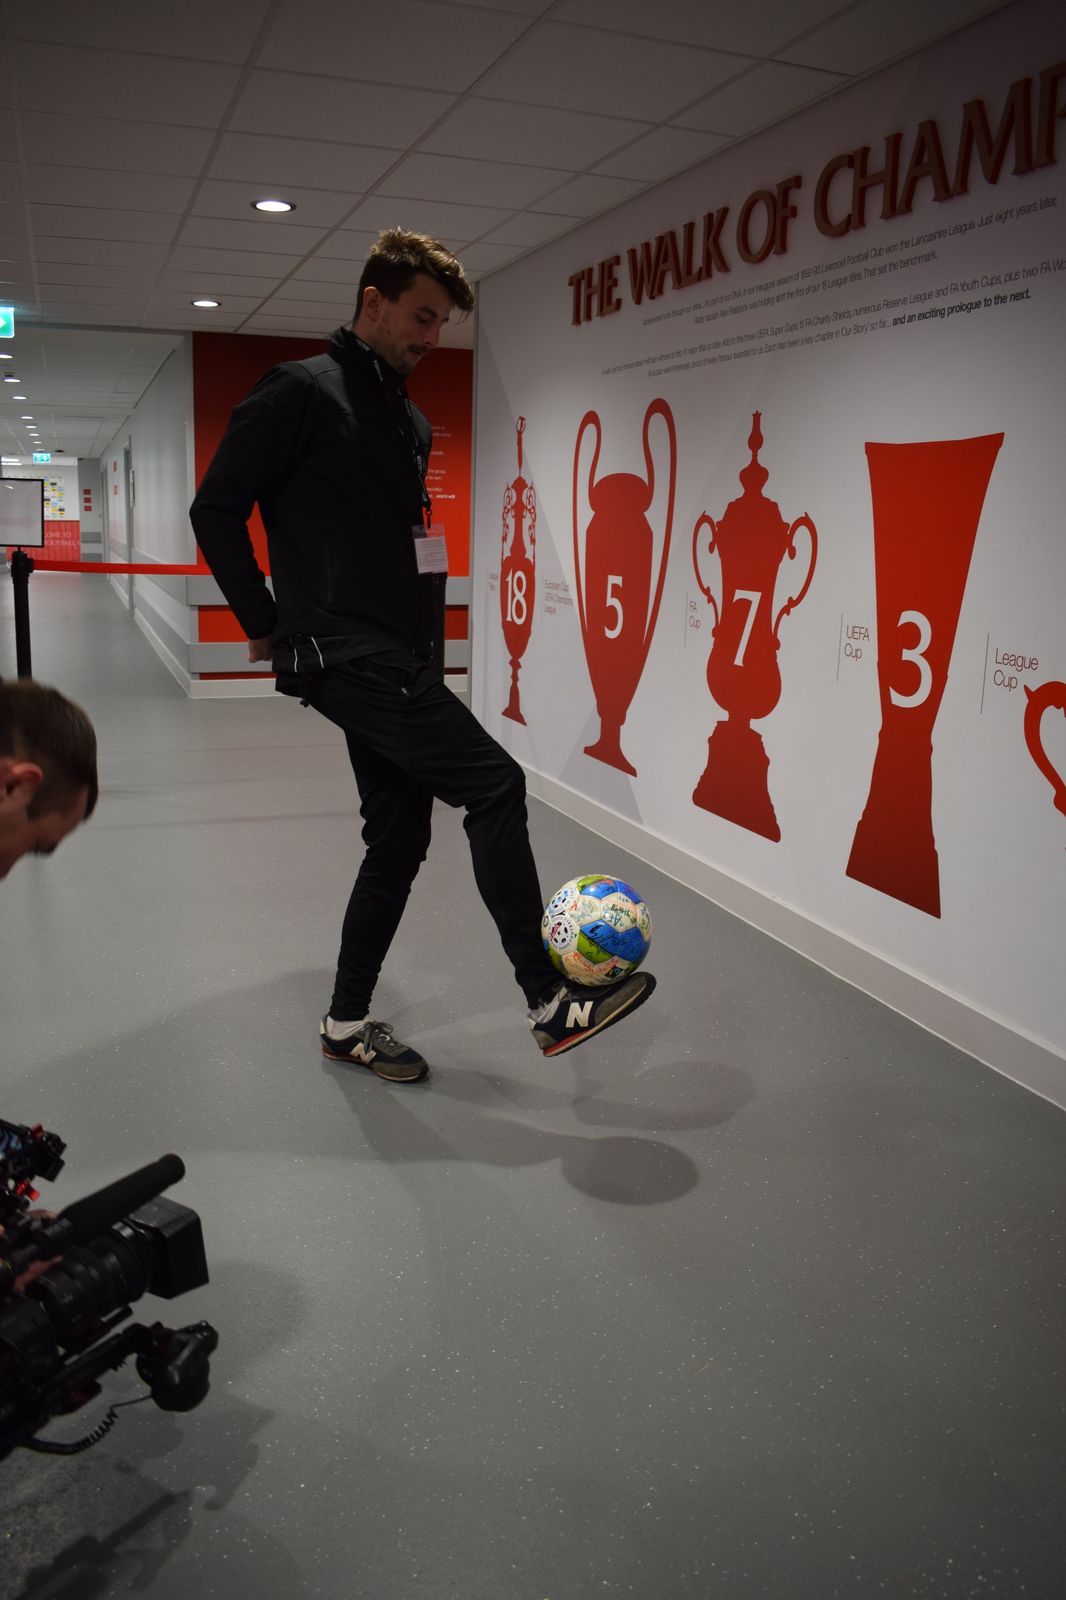 The Ball in Anfield